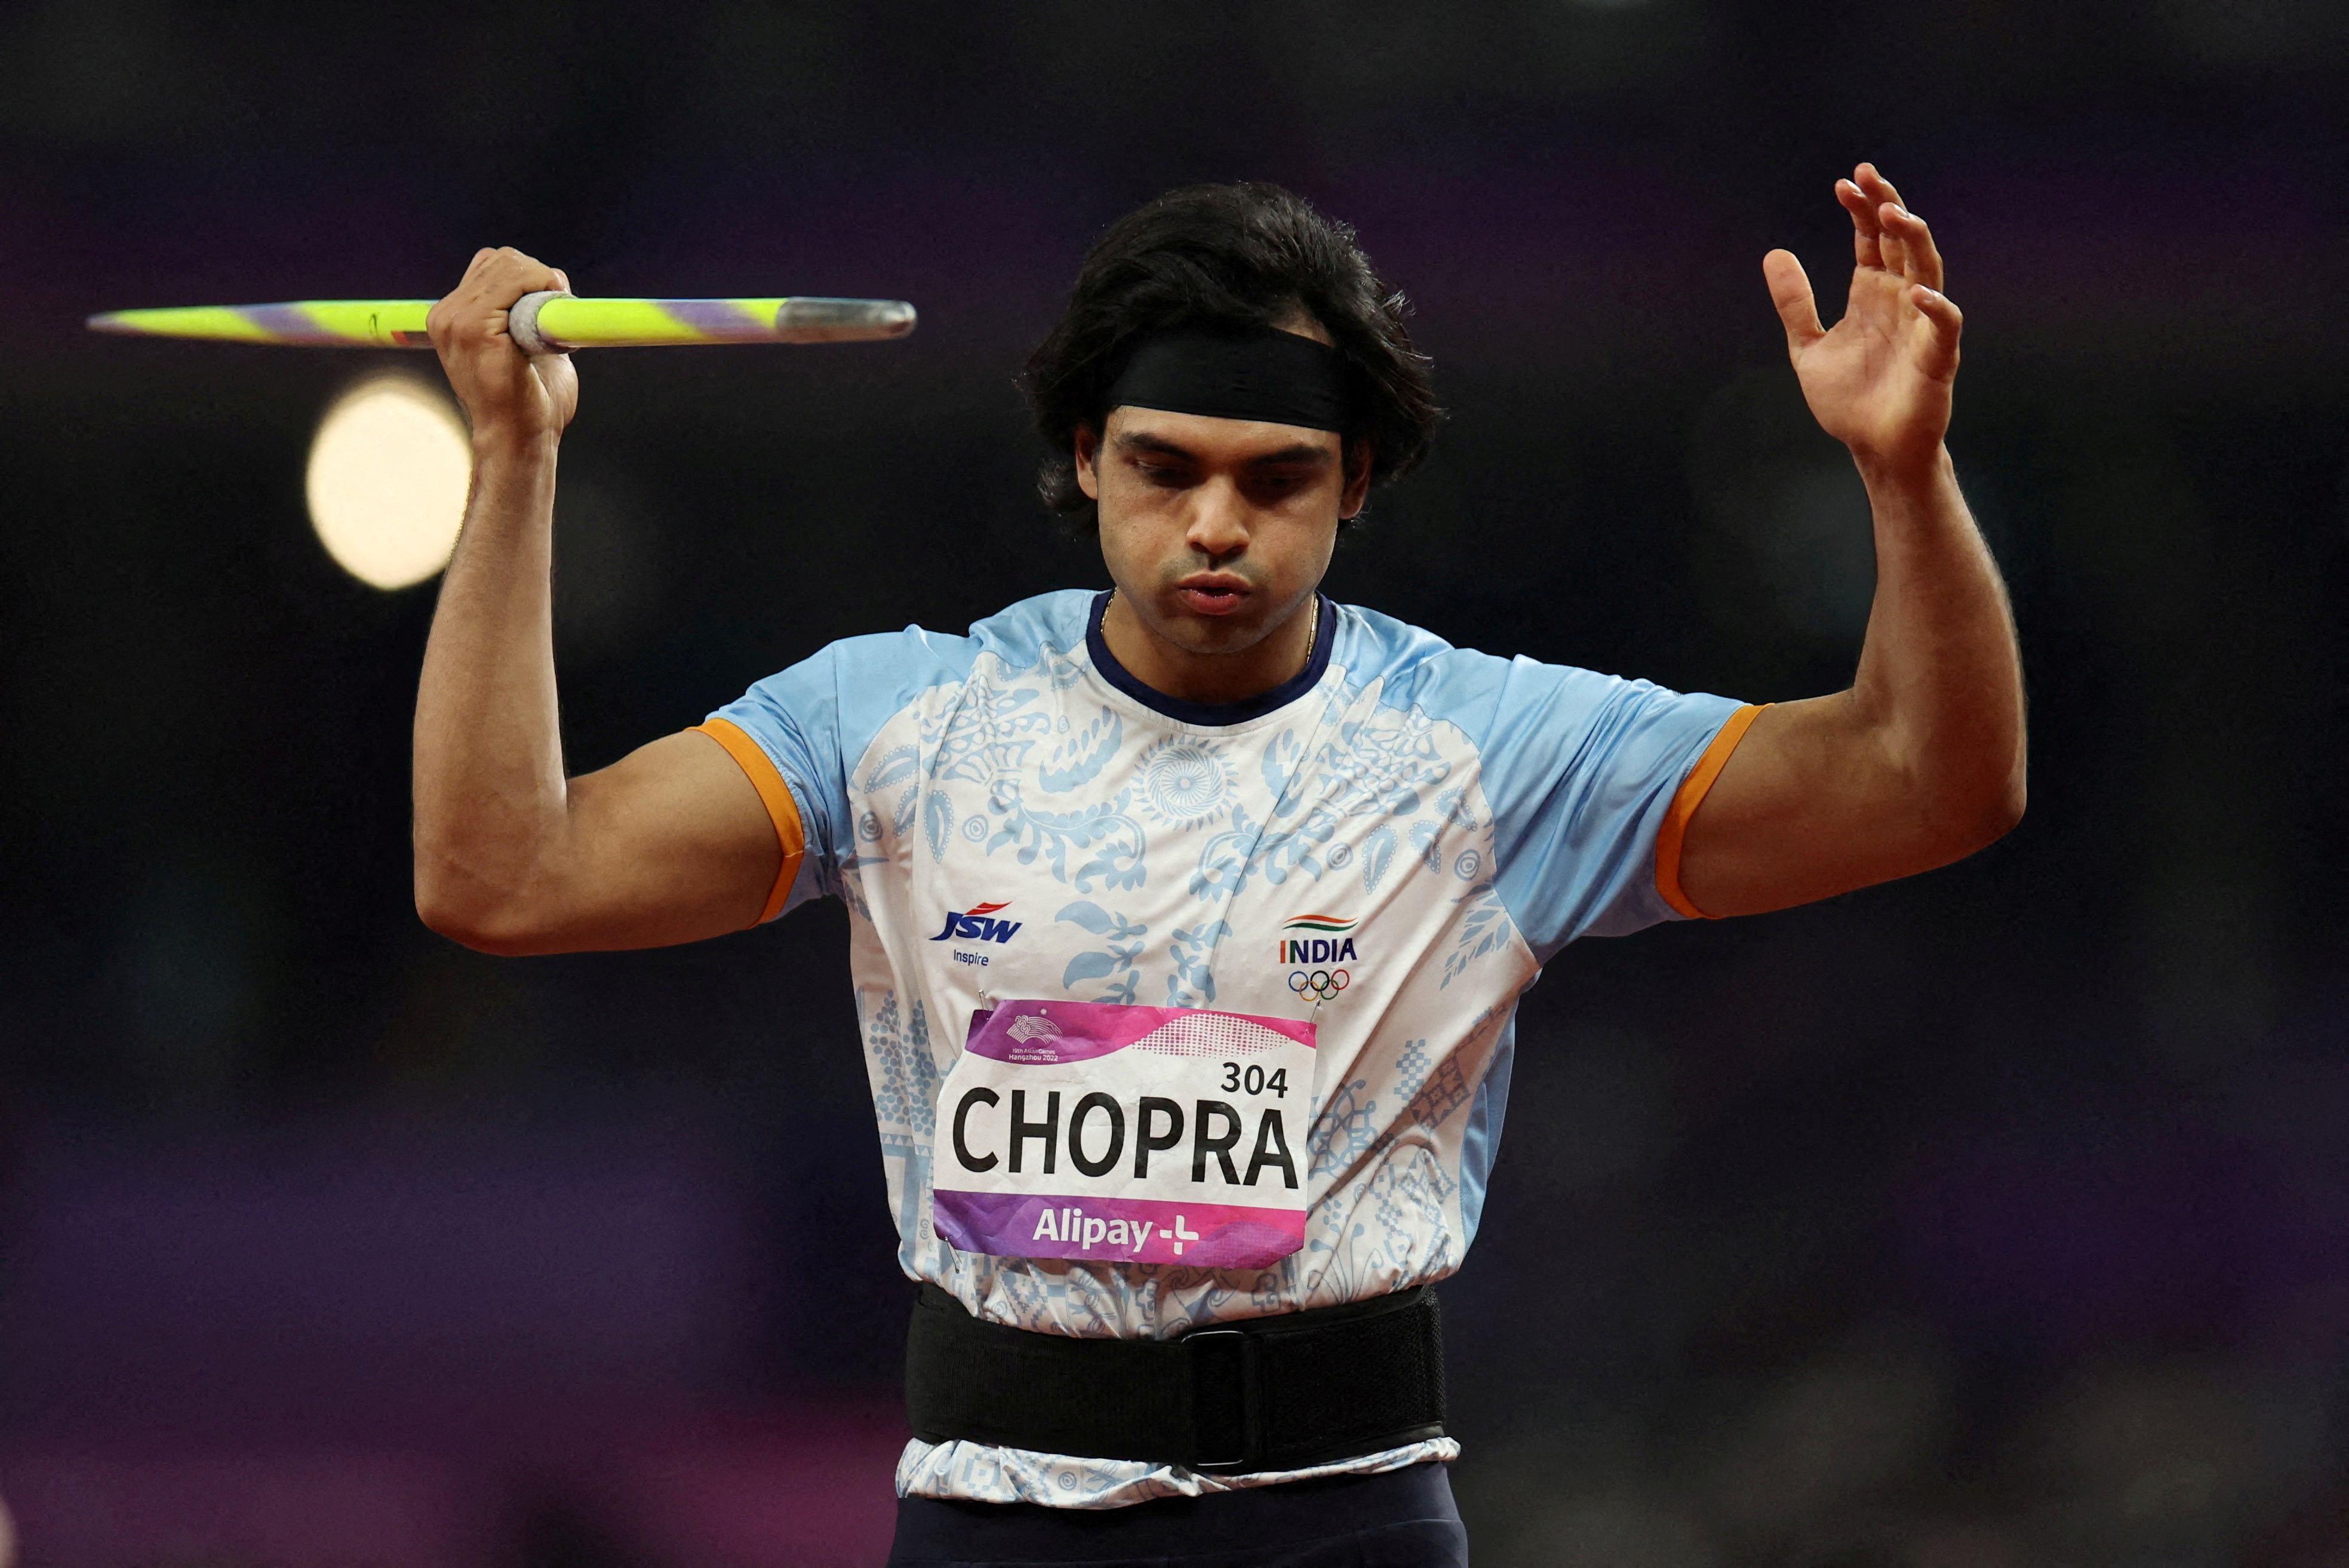 Olympics-Javelin gold in Paris more important than 90-metre throw for India's Chopra, says coach